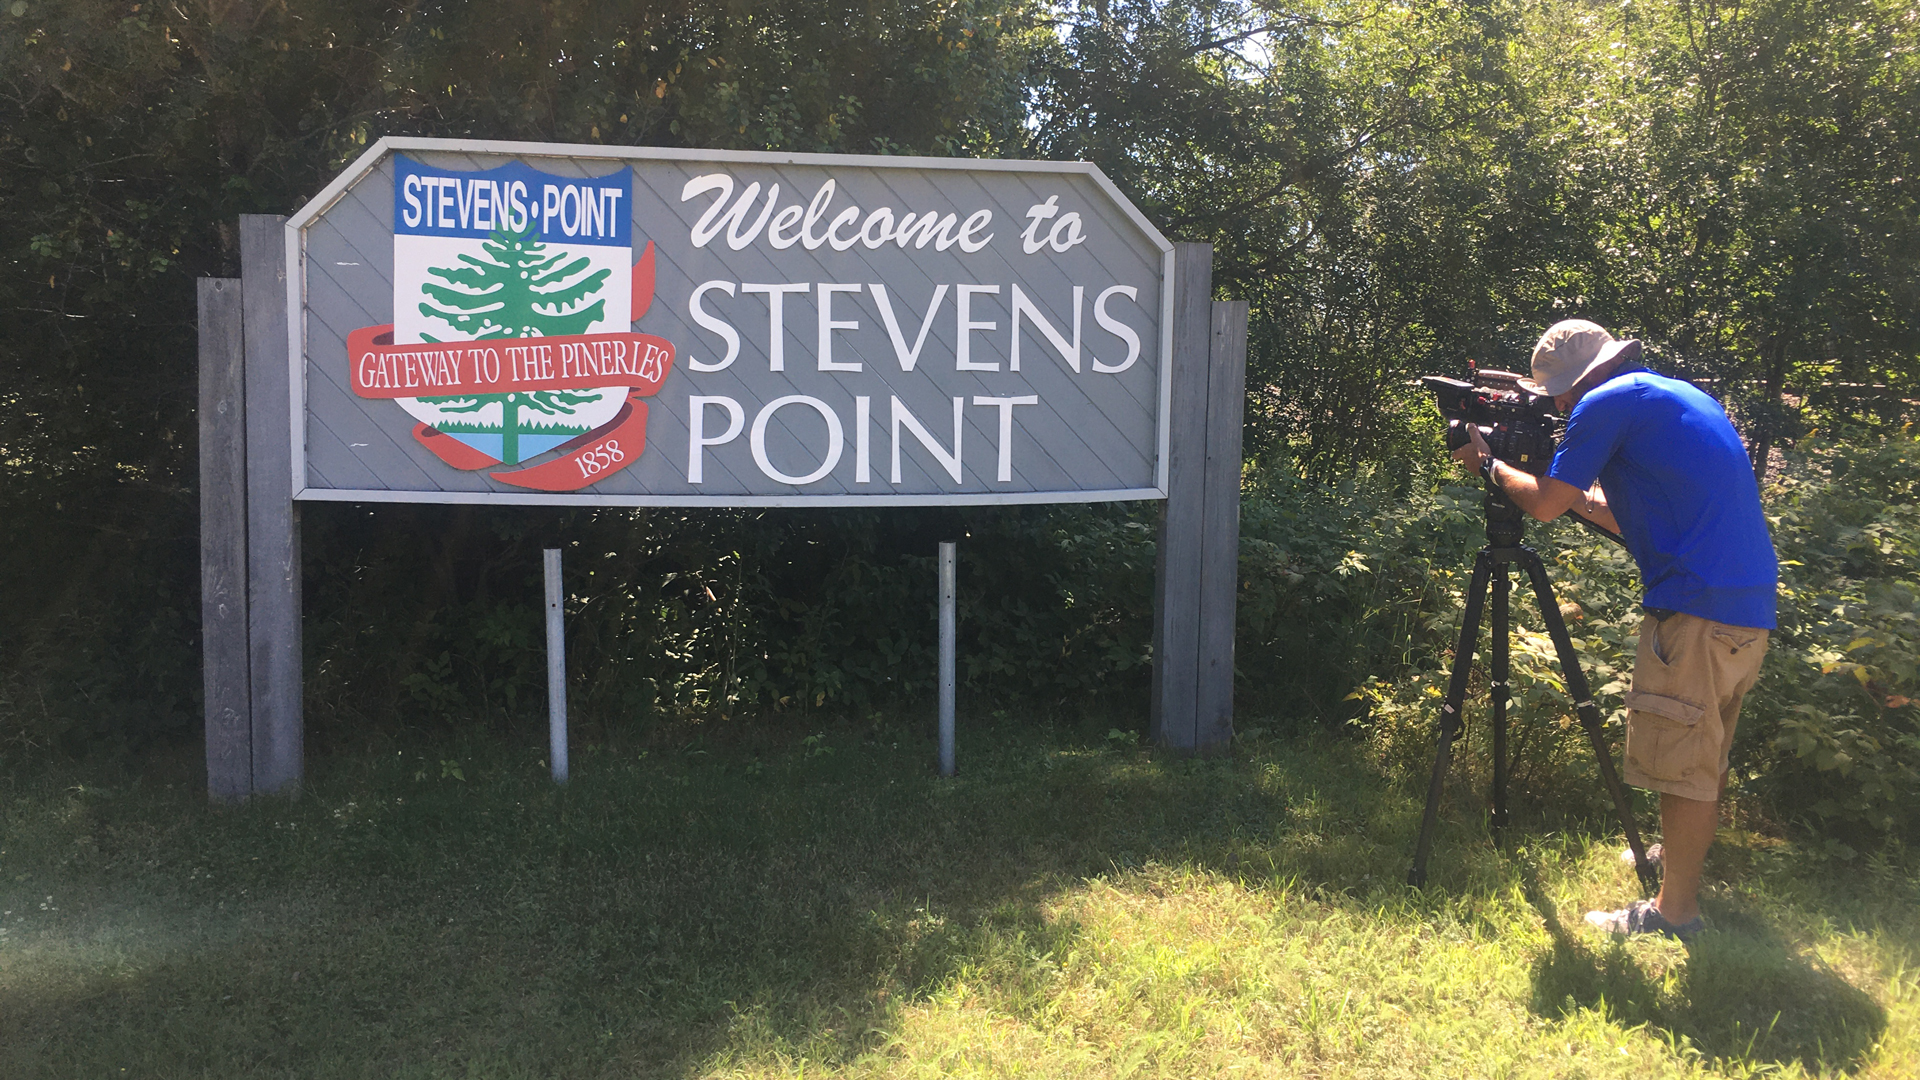 A camera man films a welcome sign to Stevens Point, Wisconsin